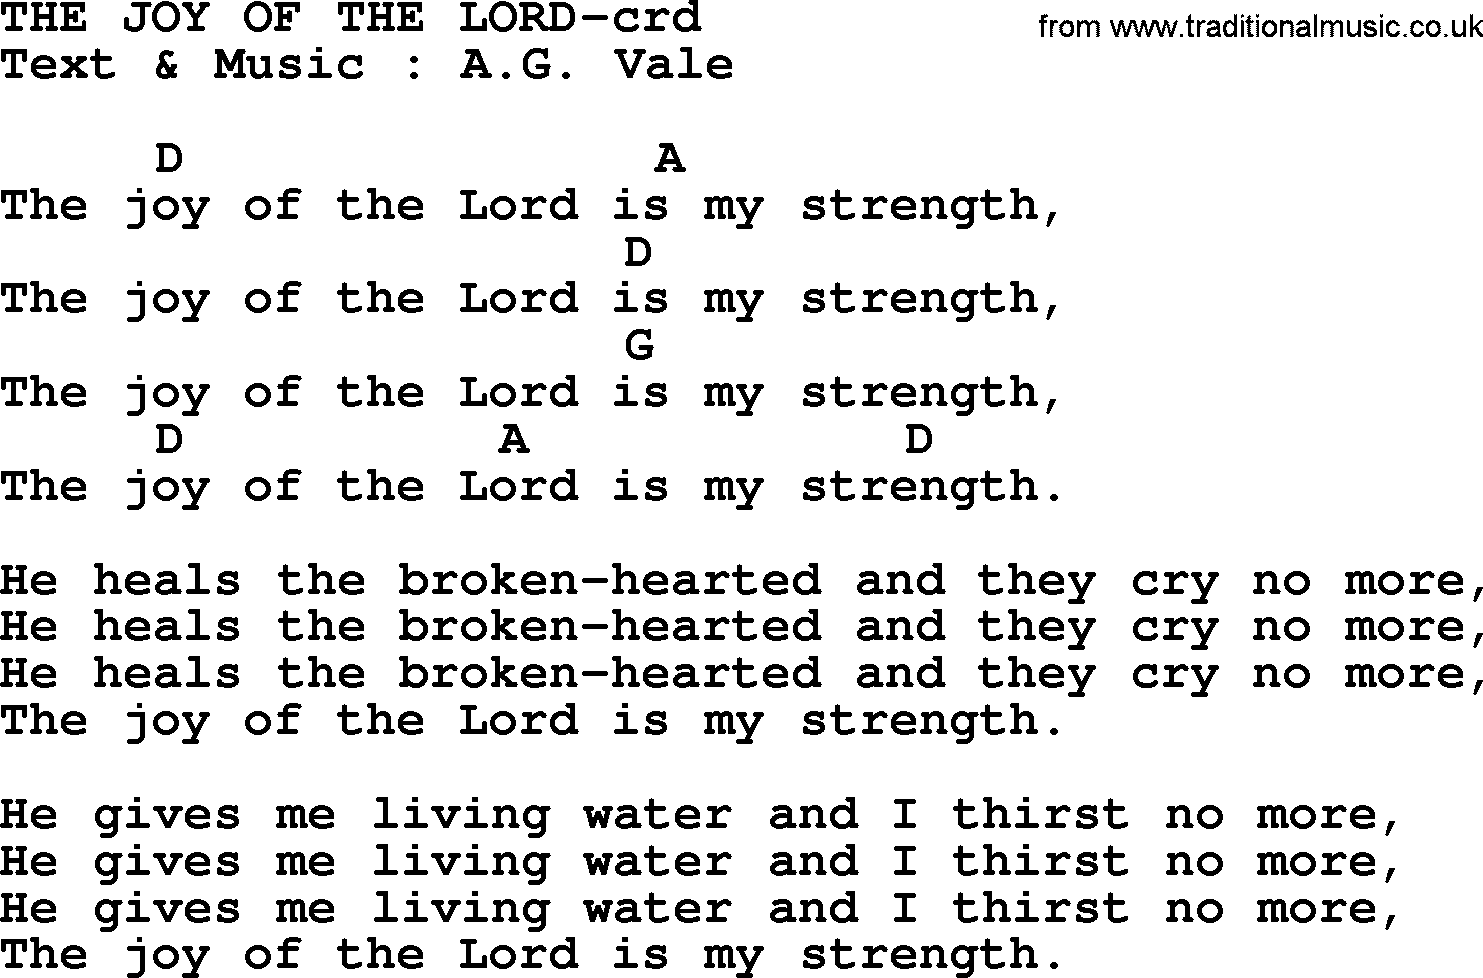 Top 500 Hymn: The Joy Of The Lord, lyrics and chords